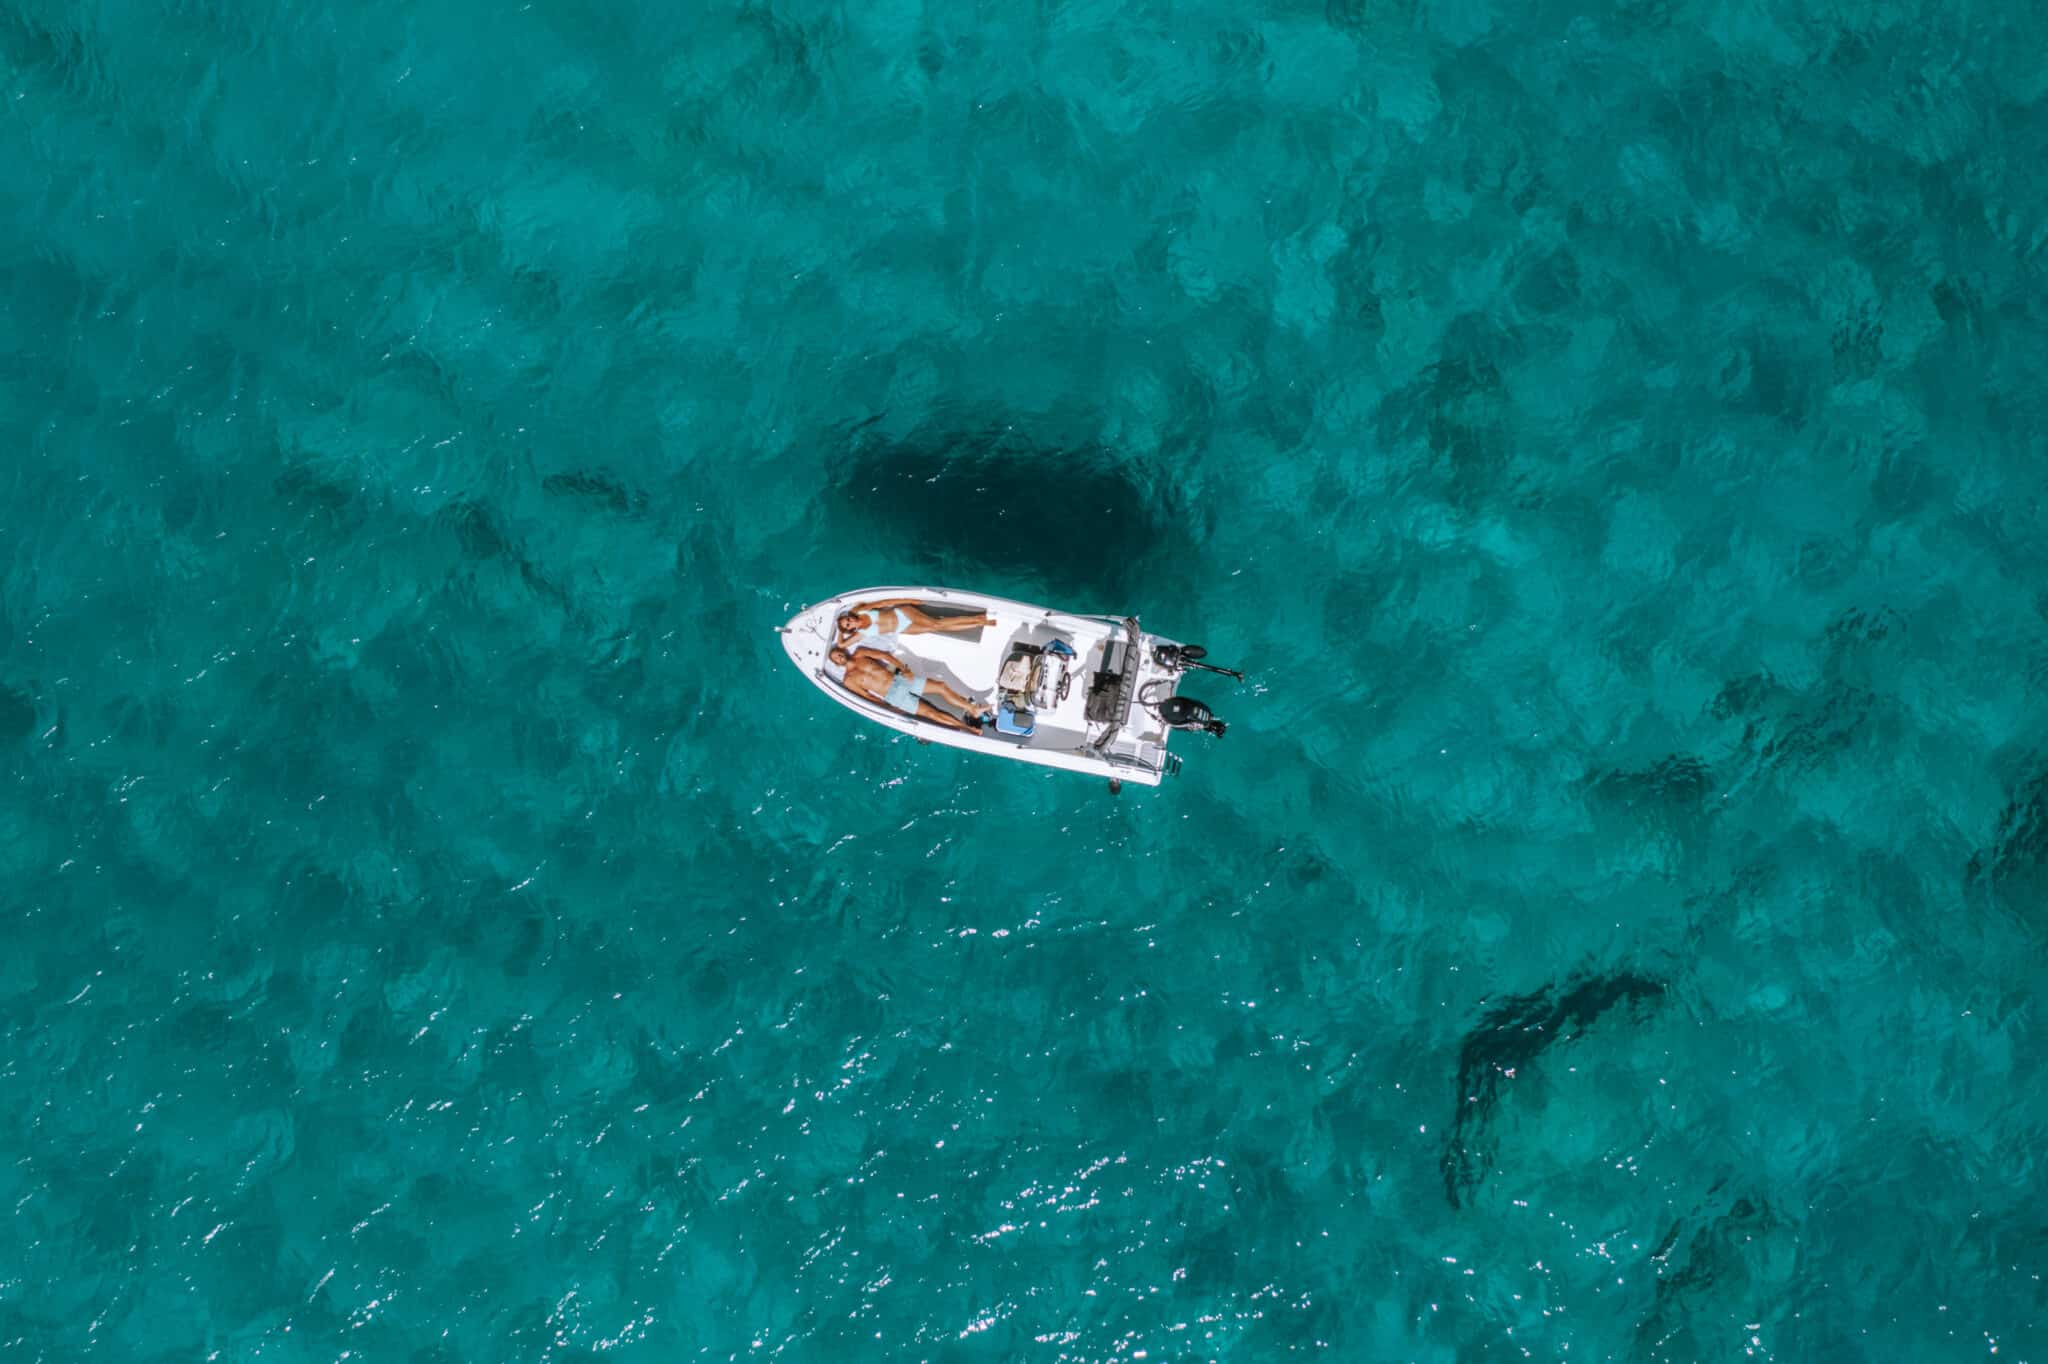 An aerial view of a small boat off the coast of Milos island, Greece.